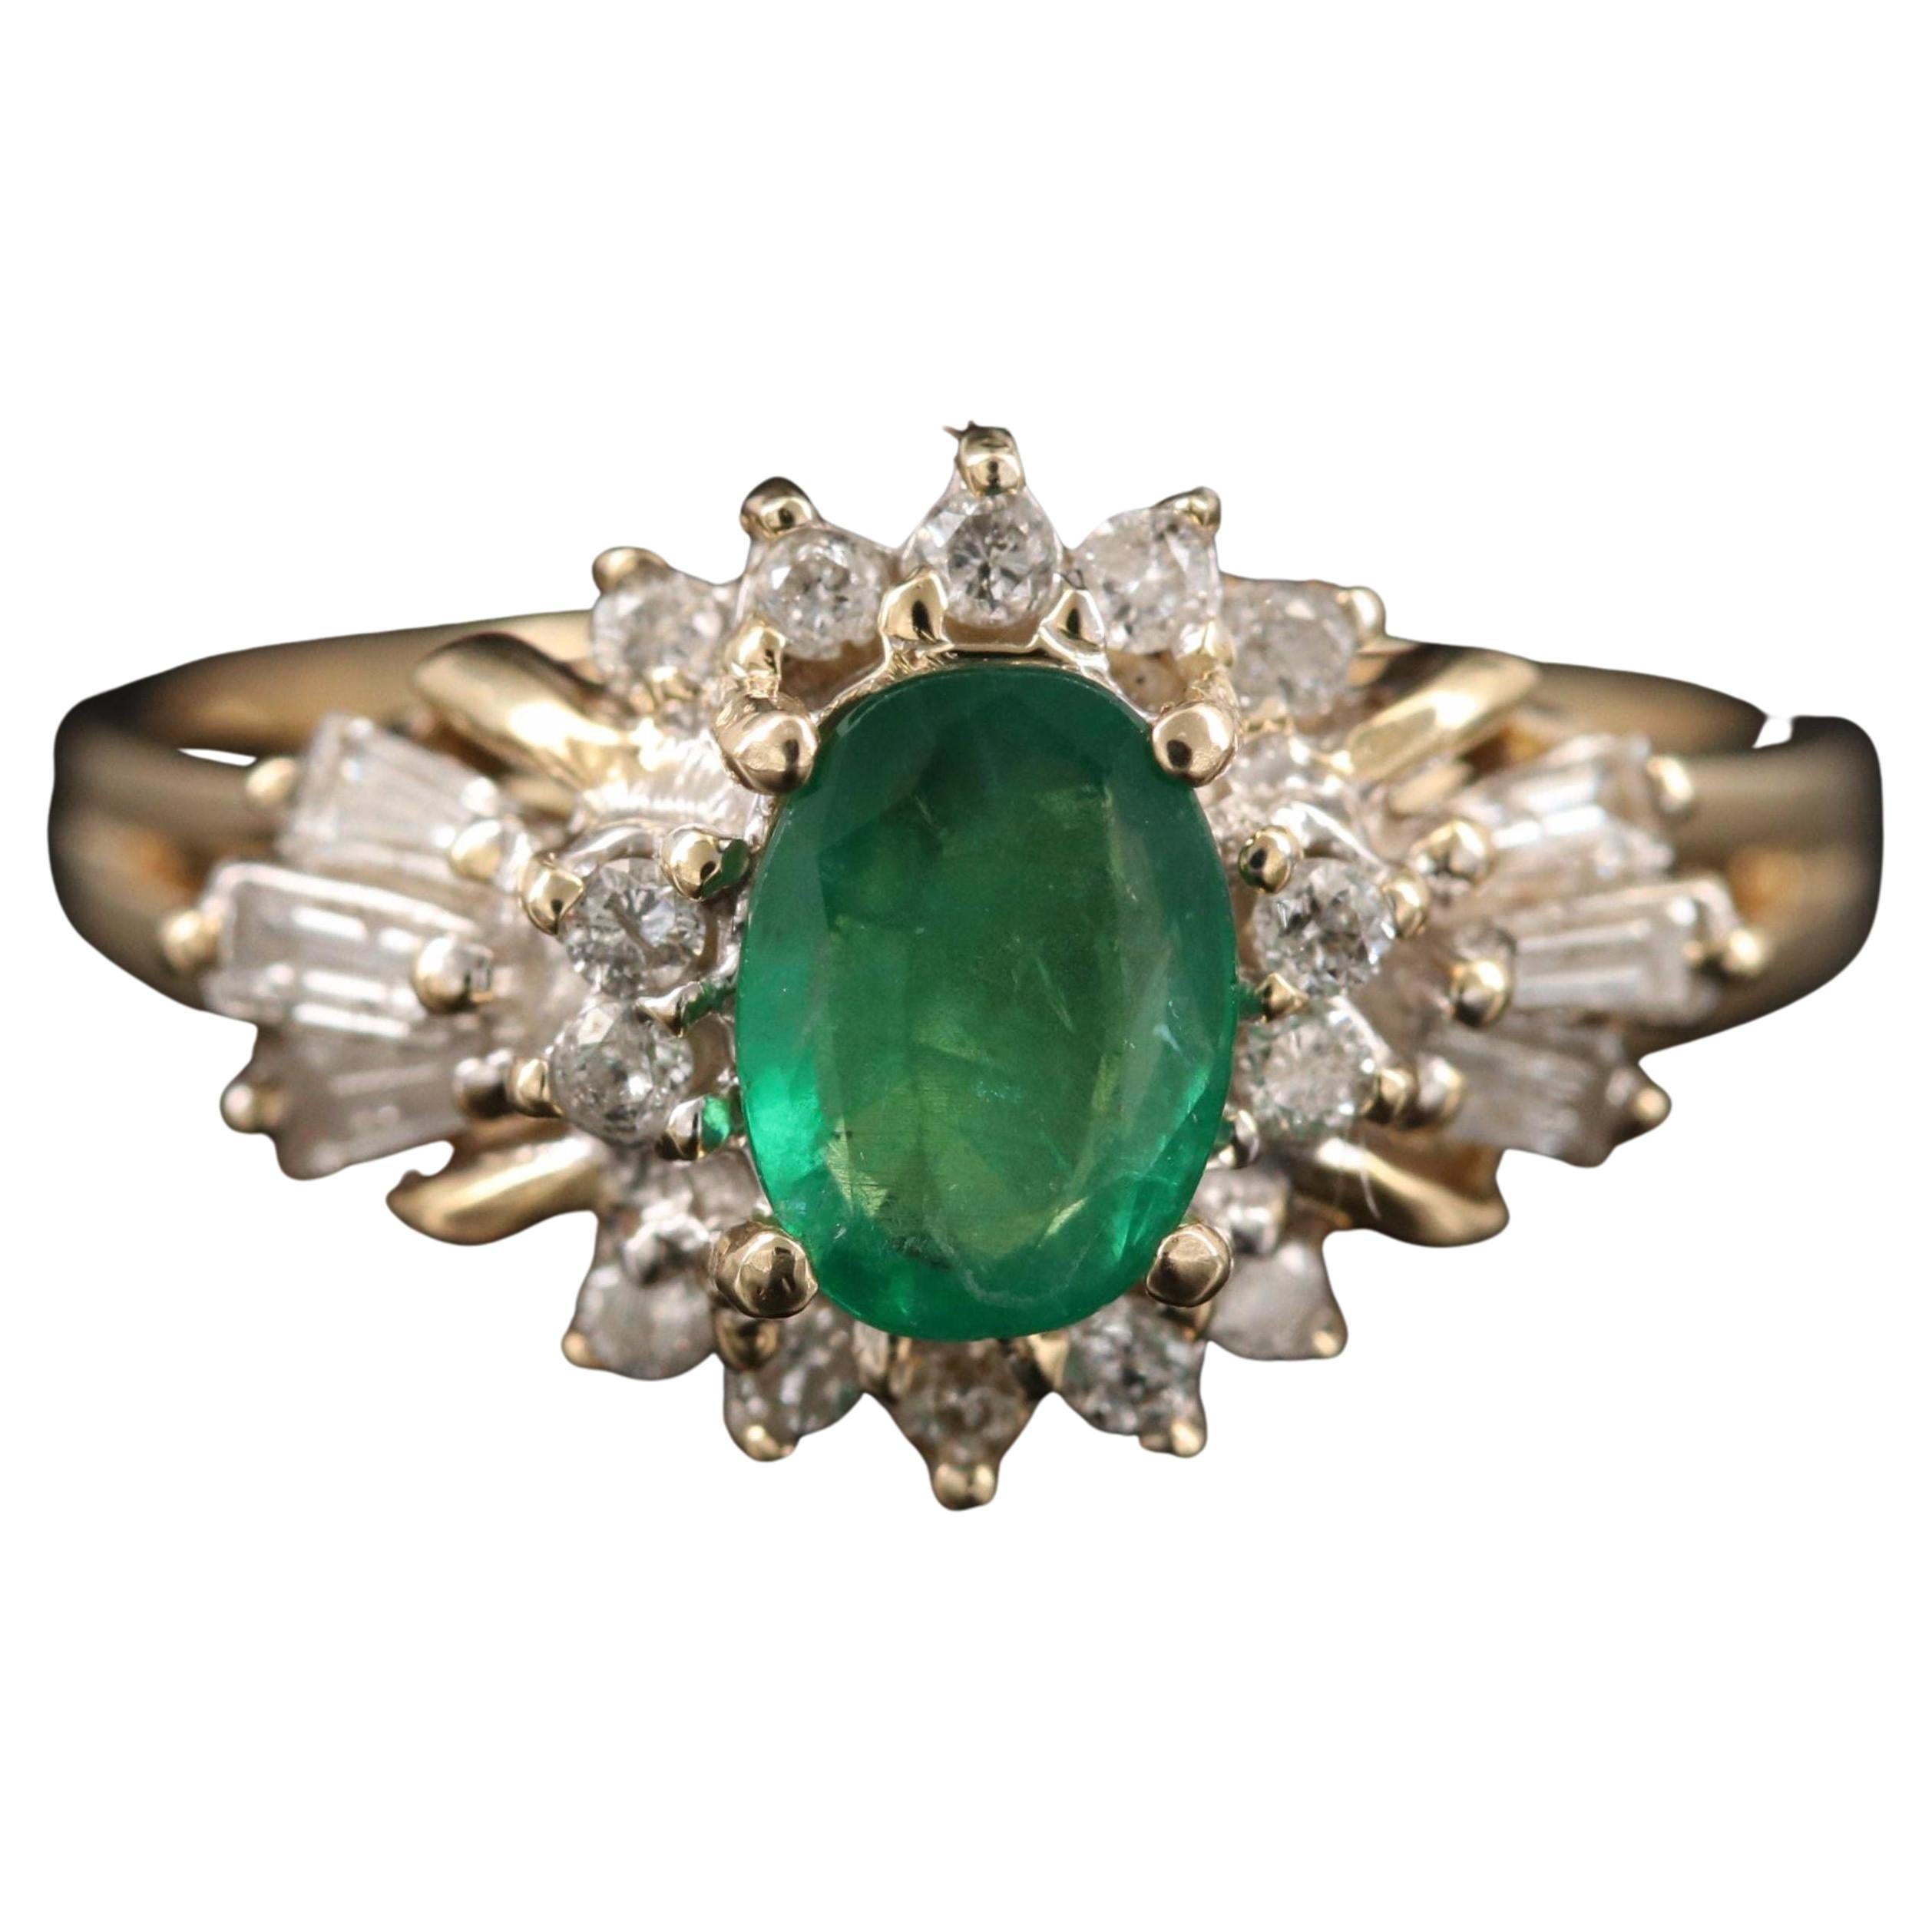 For Sale:  Oval Cut Natural Emerald Engagement Ring, Floral Emerald Diamond Wedding Ring